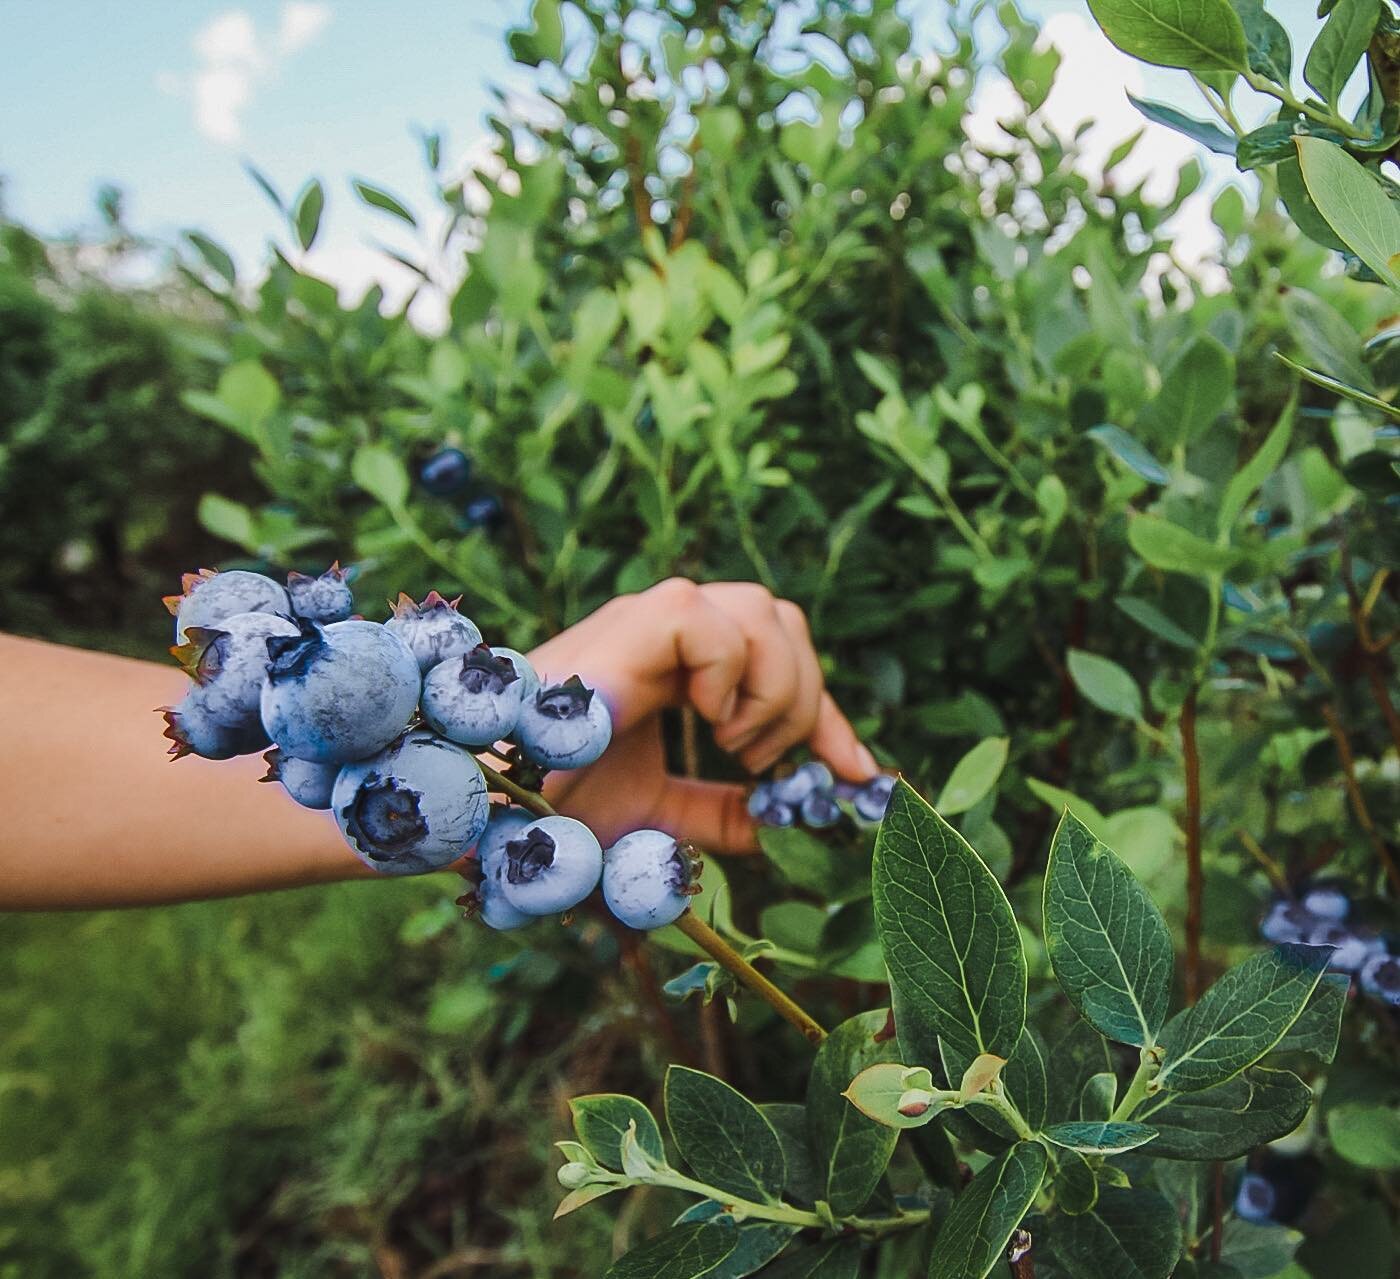 Blueberry season is in full swing at The Packing House! 🫐 Join us at our beautiful venue space for Blueberry Upick, live music, food, drinks and fun!

Hop on over to @farreachranch to see our Upick schedule and special events this season! 🫐☺️